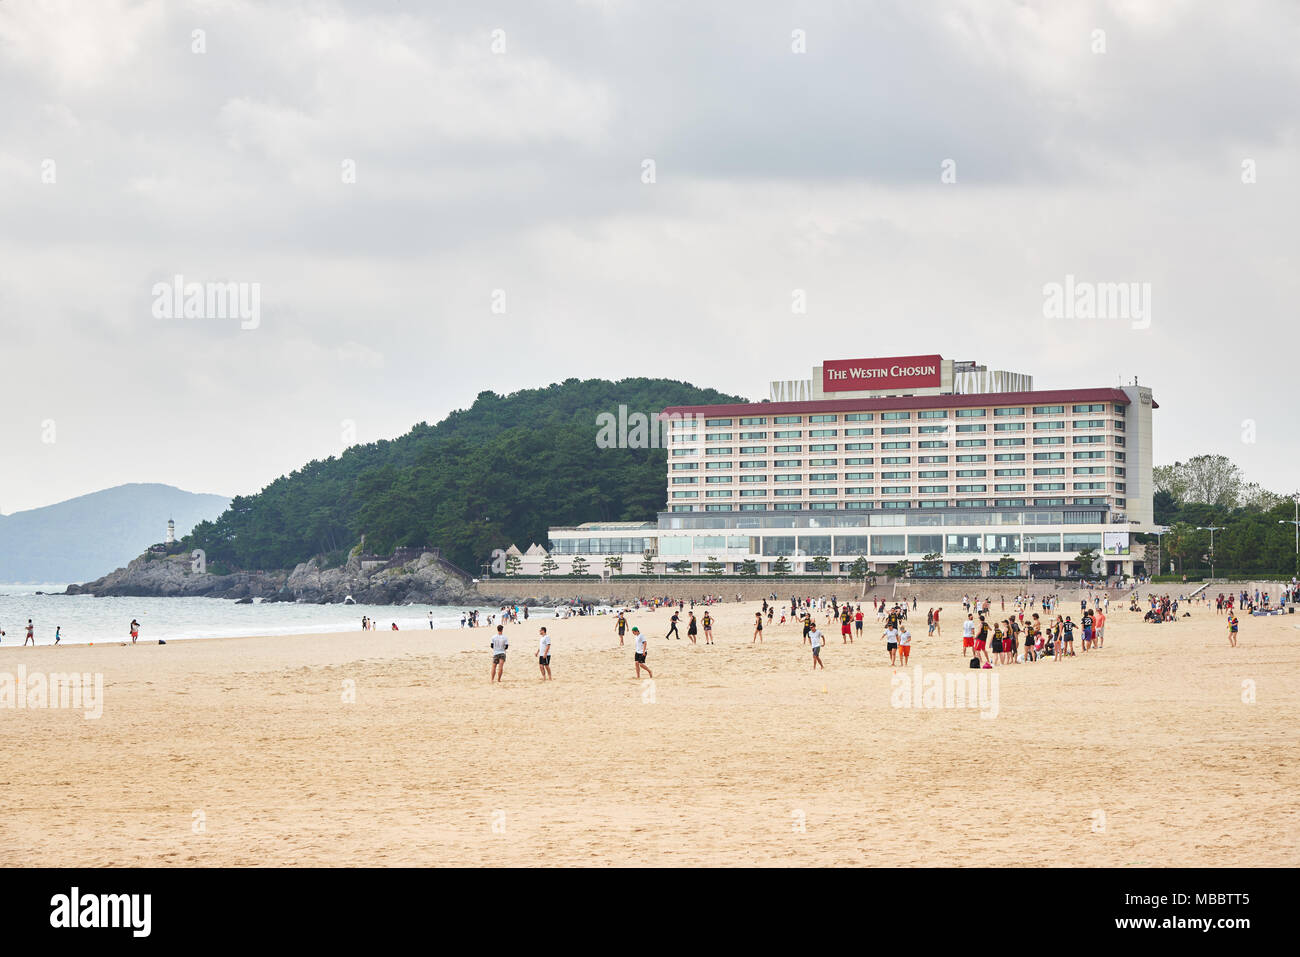 Busan, Korea - September 19, 2015: The Westin Chosun Busan is a hotel located at the entrance of Dongbaek Island in Busan. And It was one of the accom Stock Photo